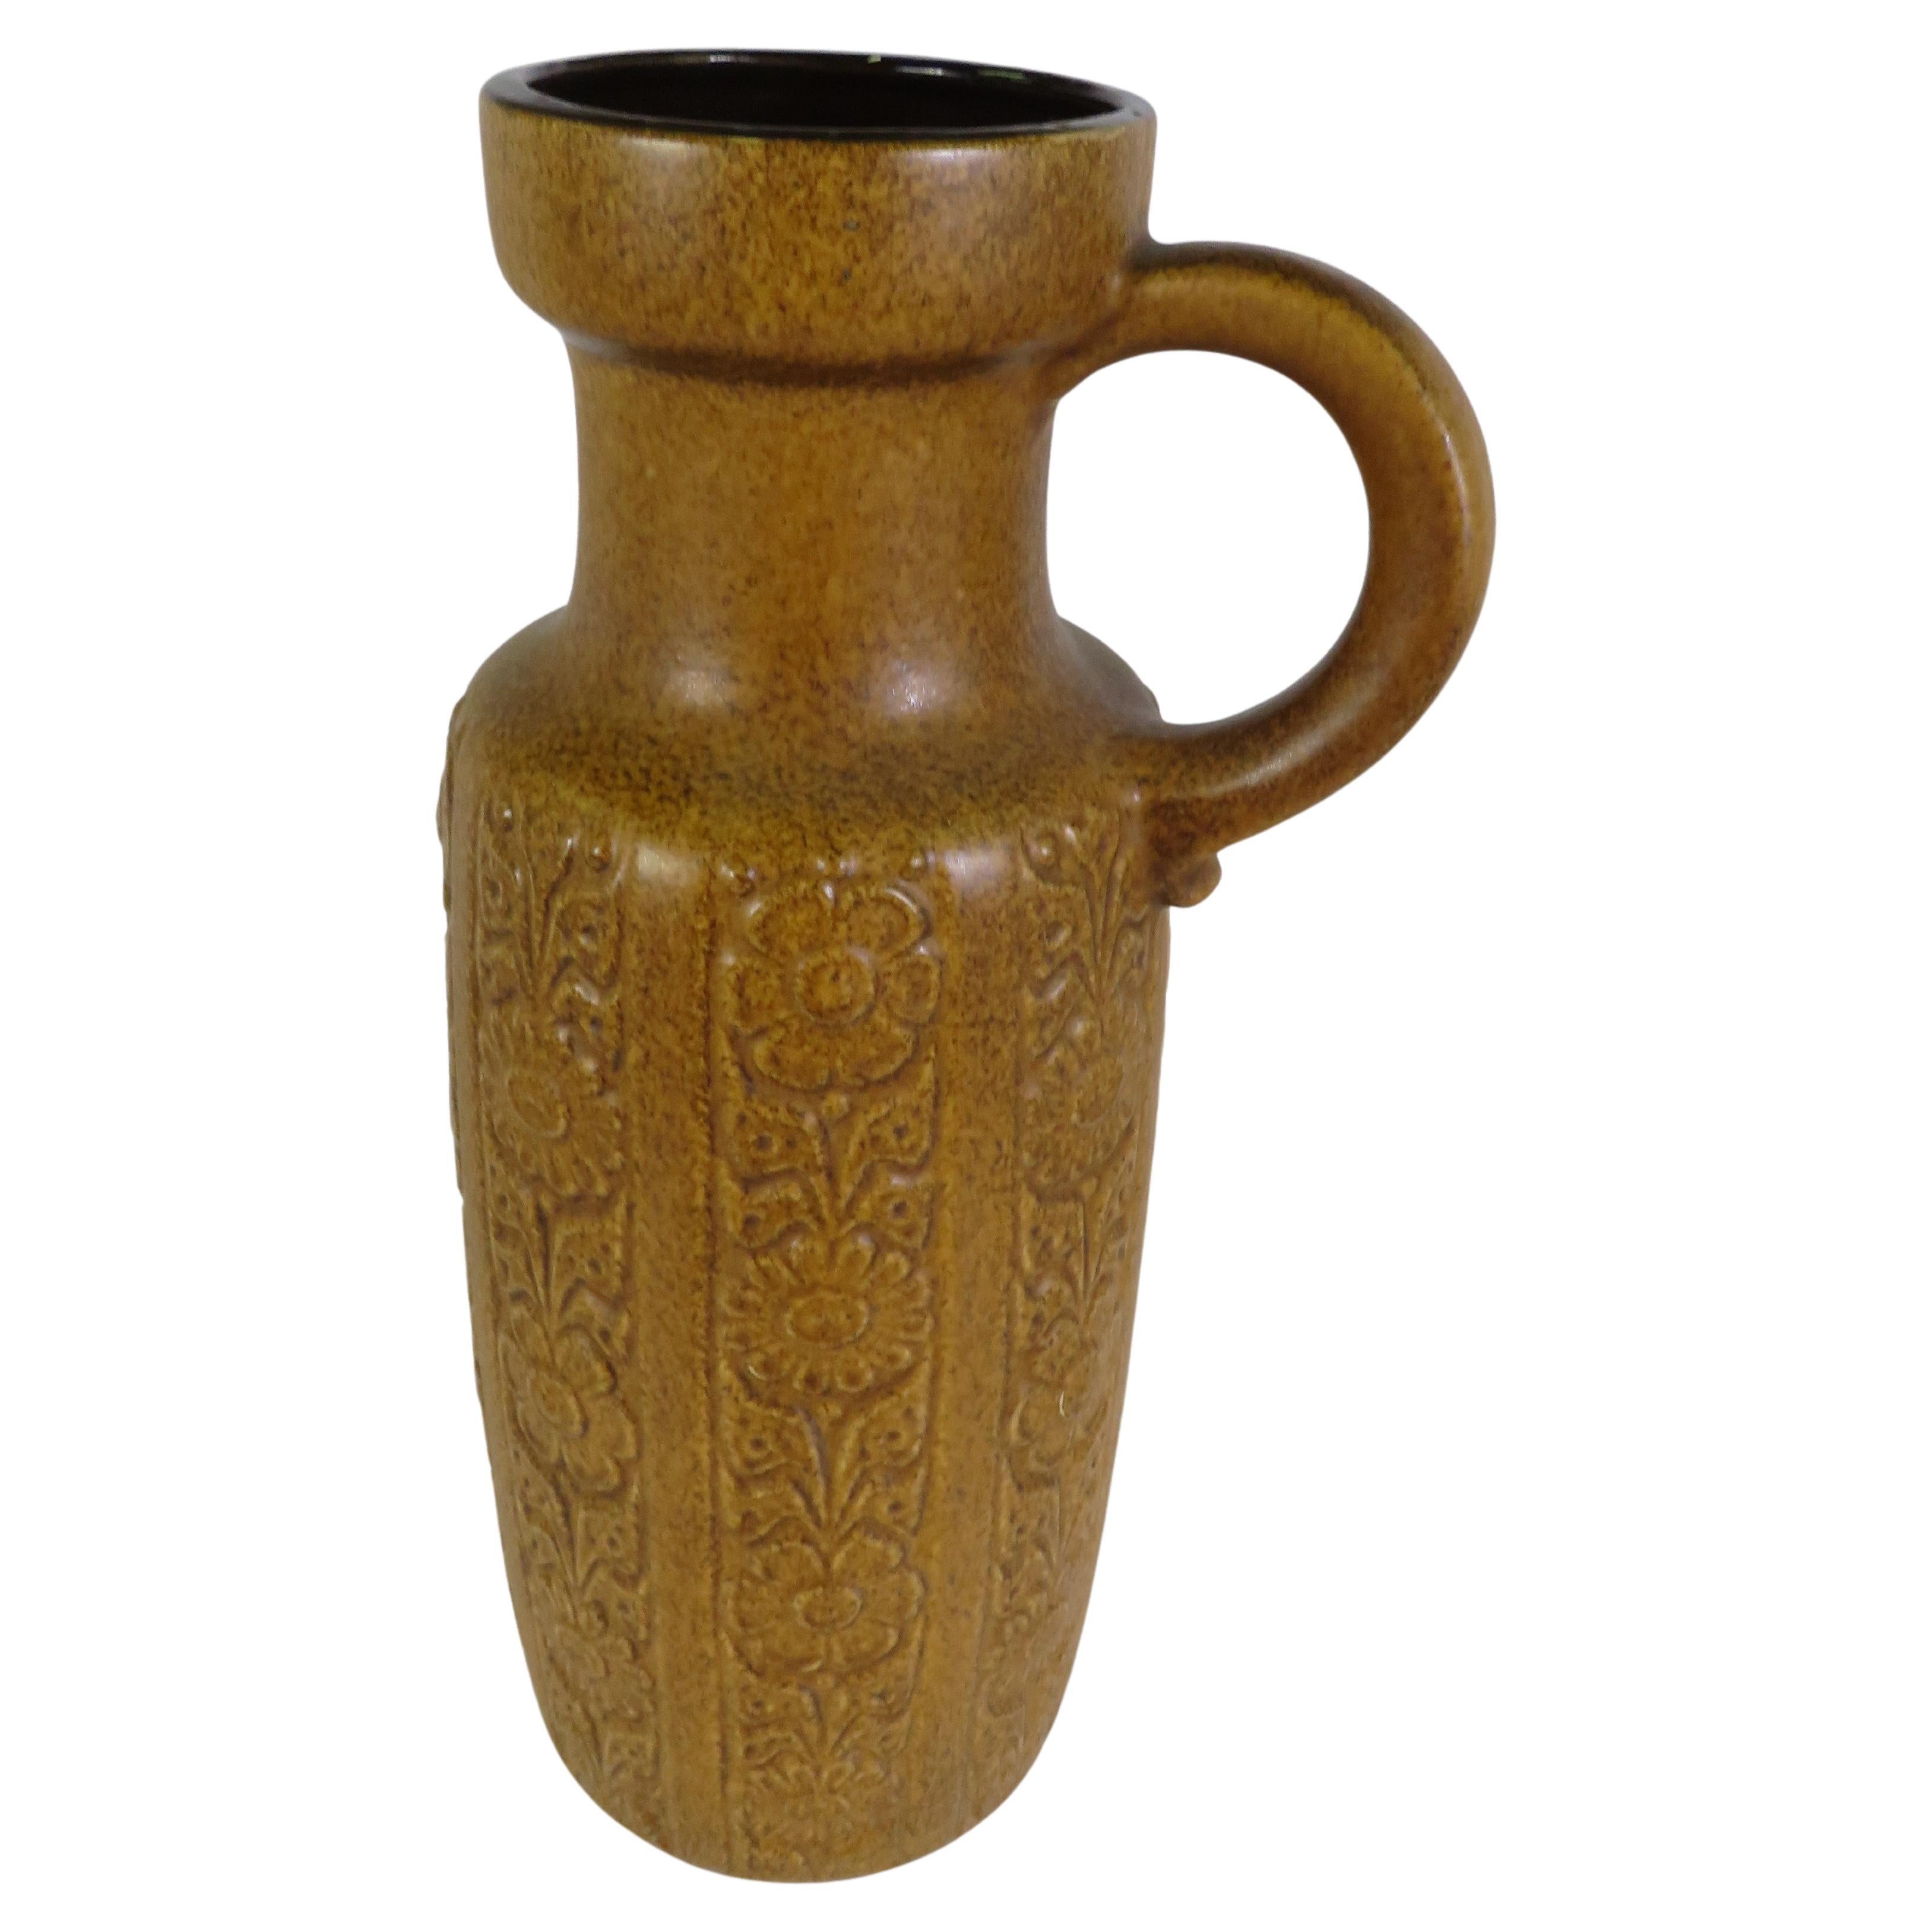 Large and impressive midcentury German pottery Floor Handle Vase or Krug from Scheurich pottery. In the outside a mottled mustard yellow color with a 3 dimensional design of flowers in perpendicular bands and a dark brown inner glaze. The Krug form